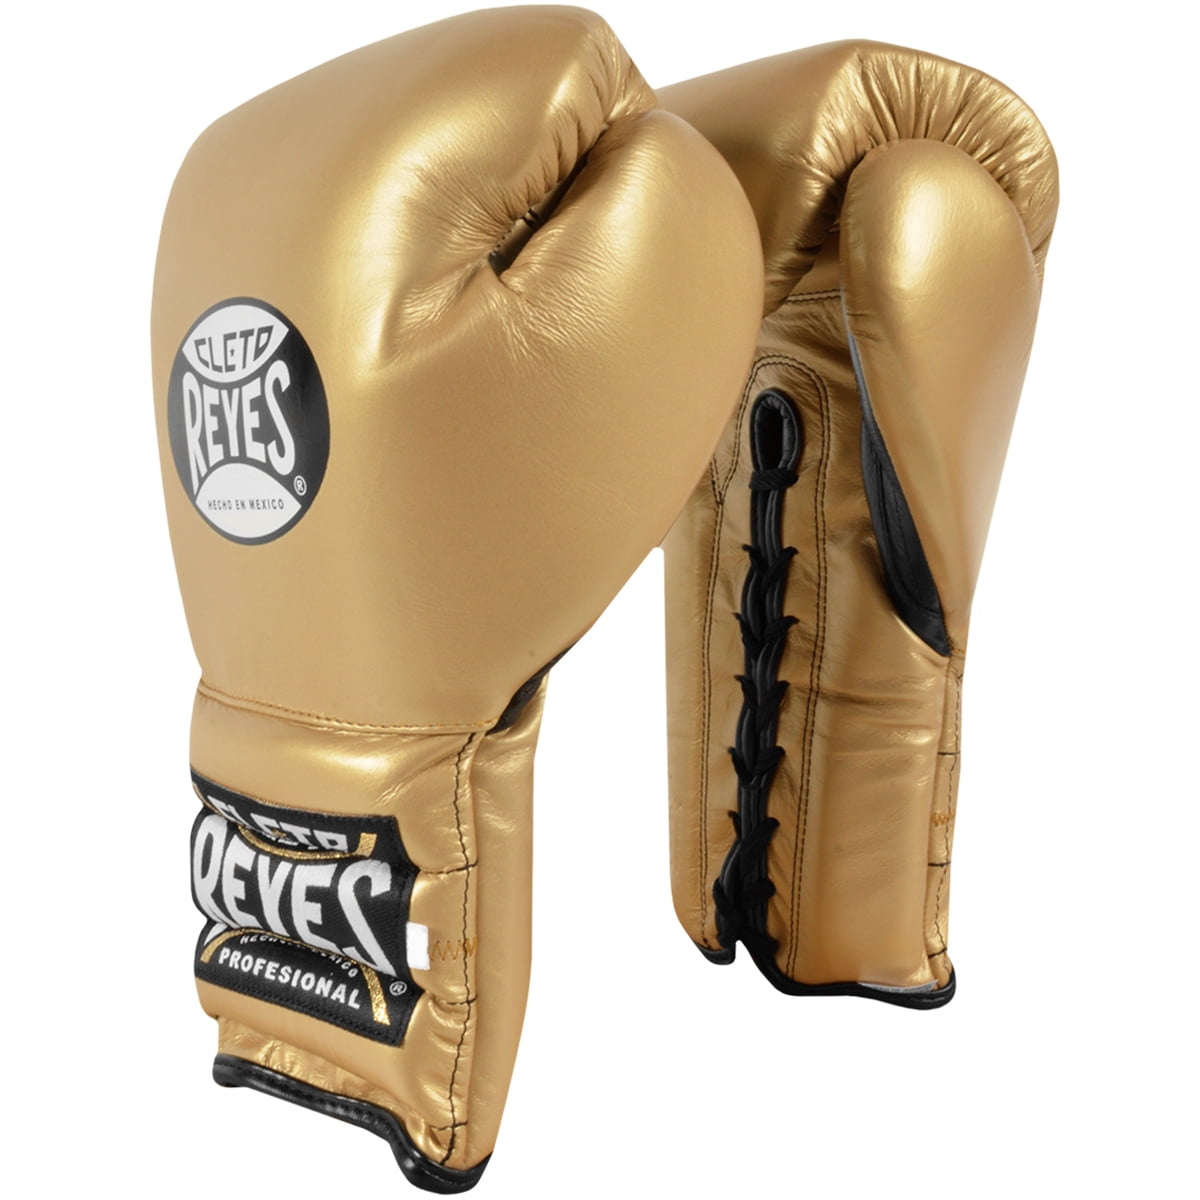 Cleto Reyes Training Boxing Gloves with Laces 